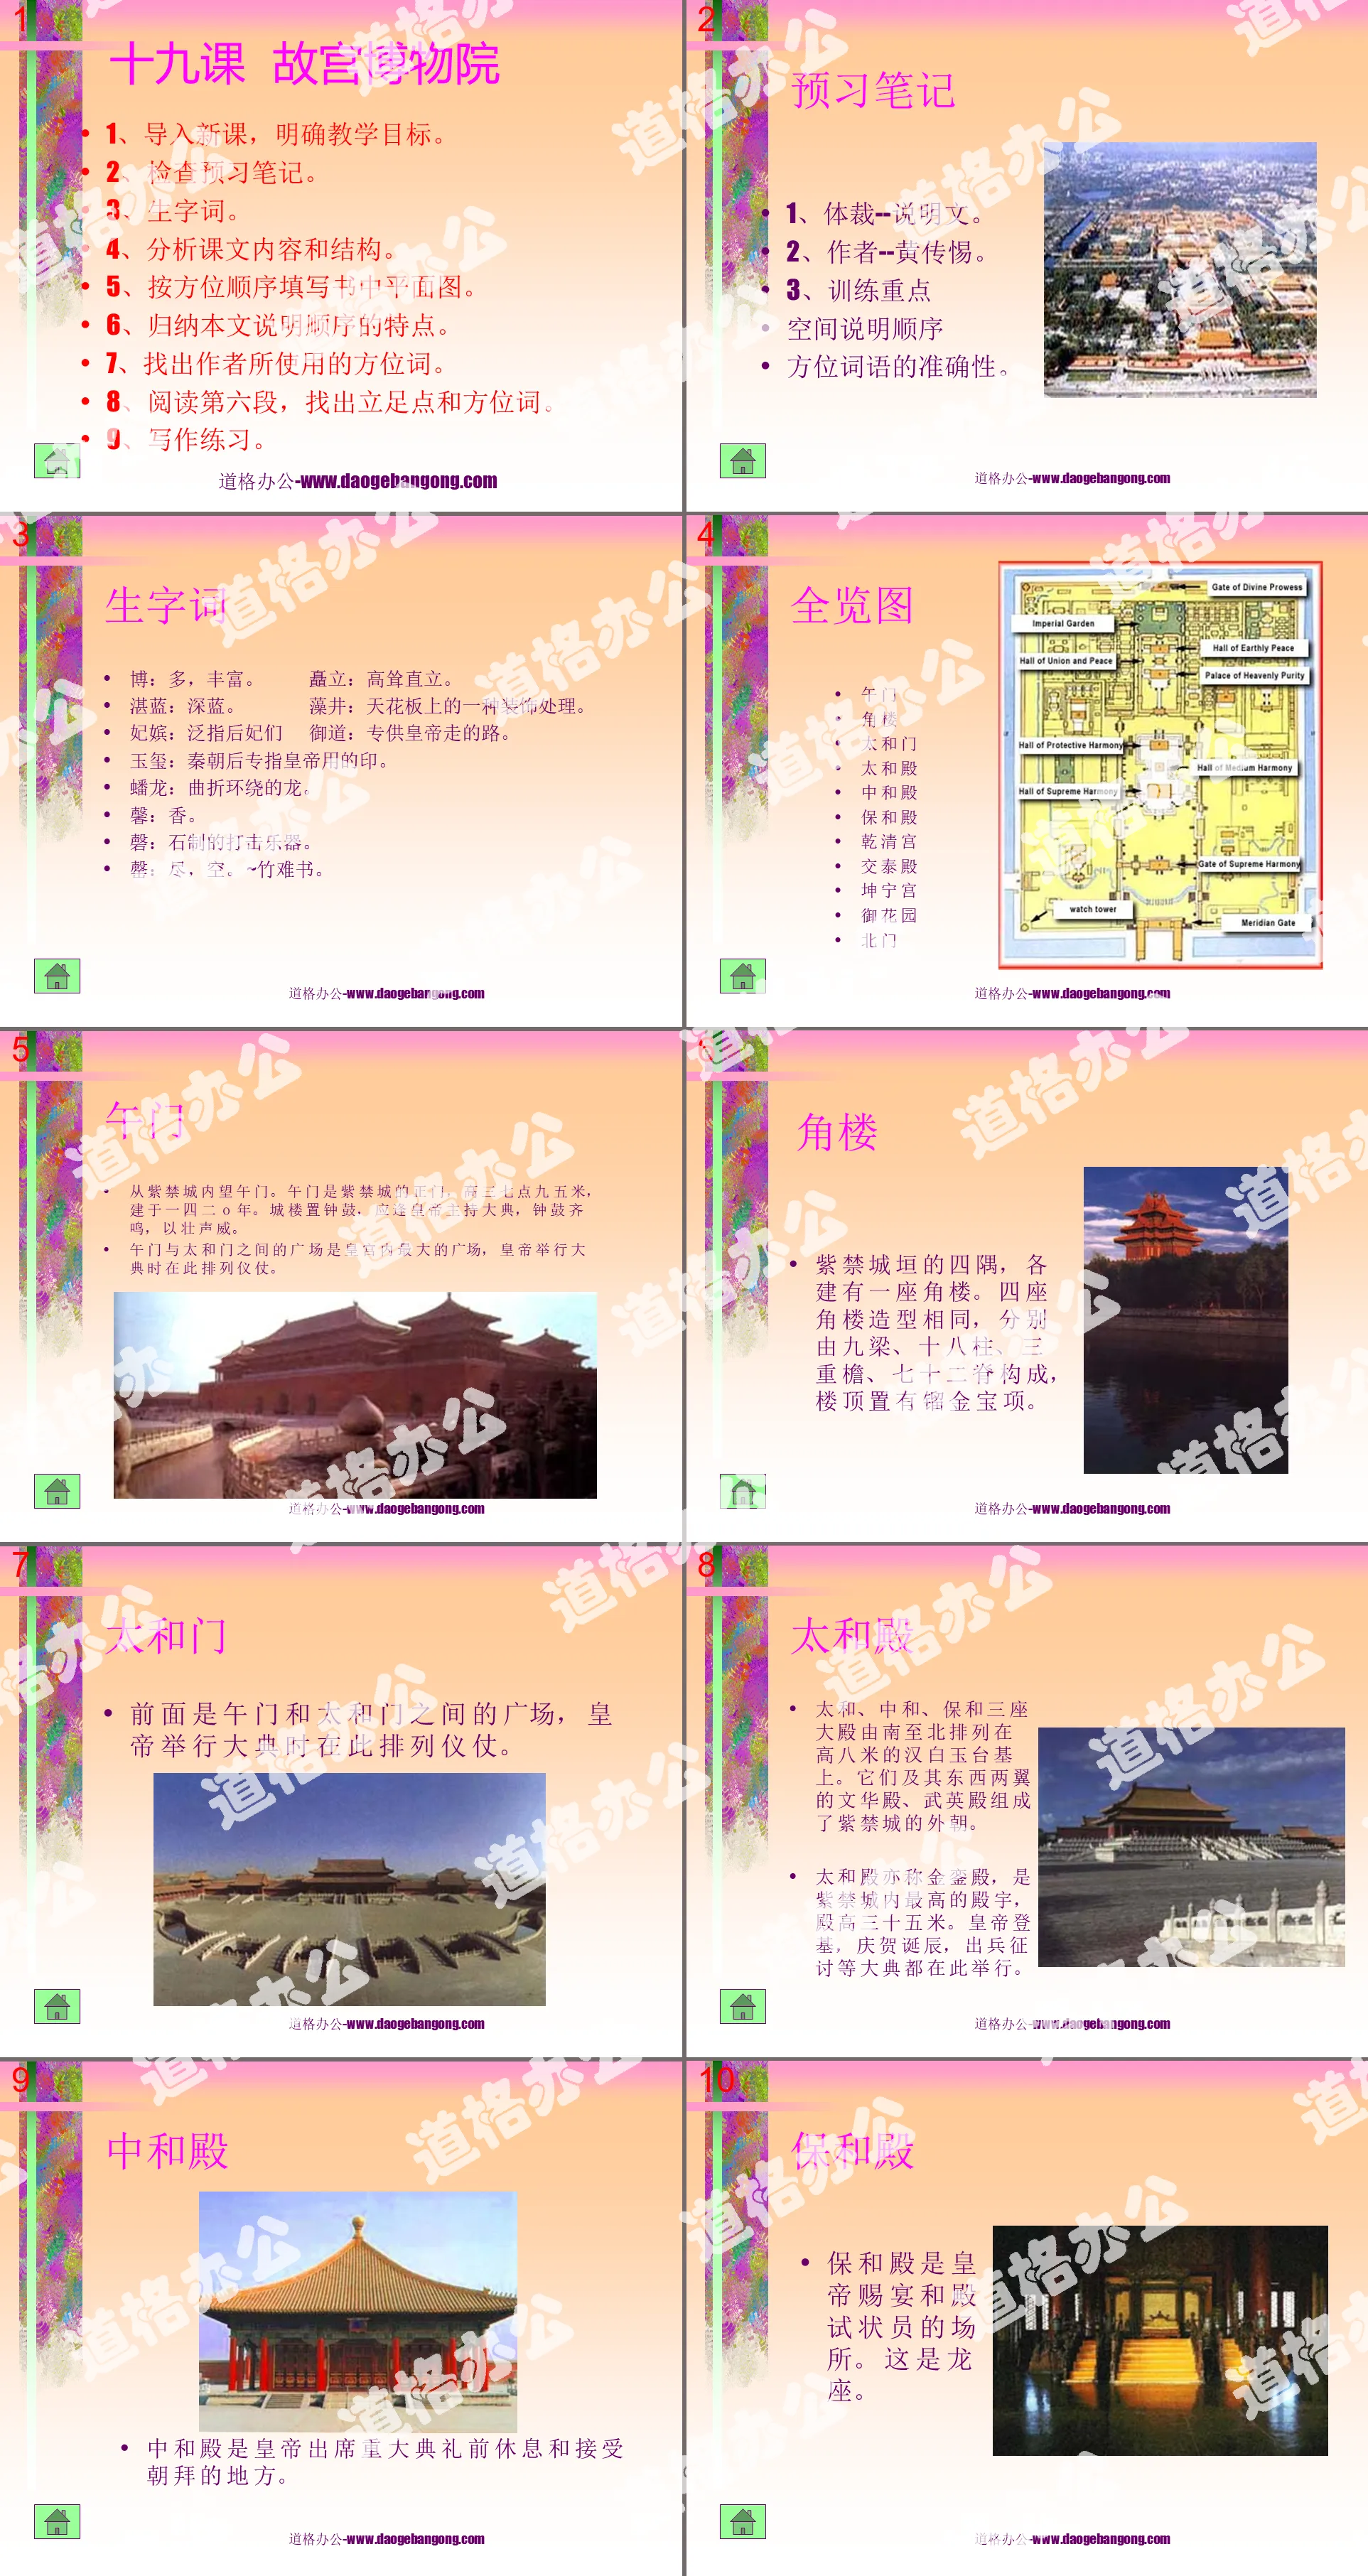 "The Palace Museum" PPT courseware 2